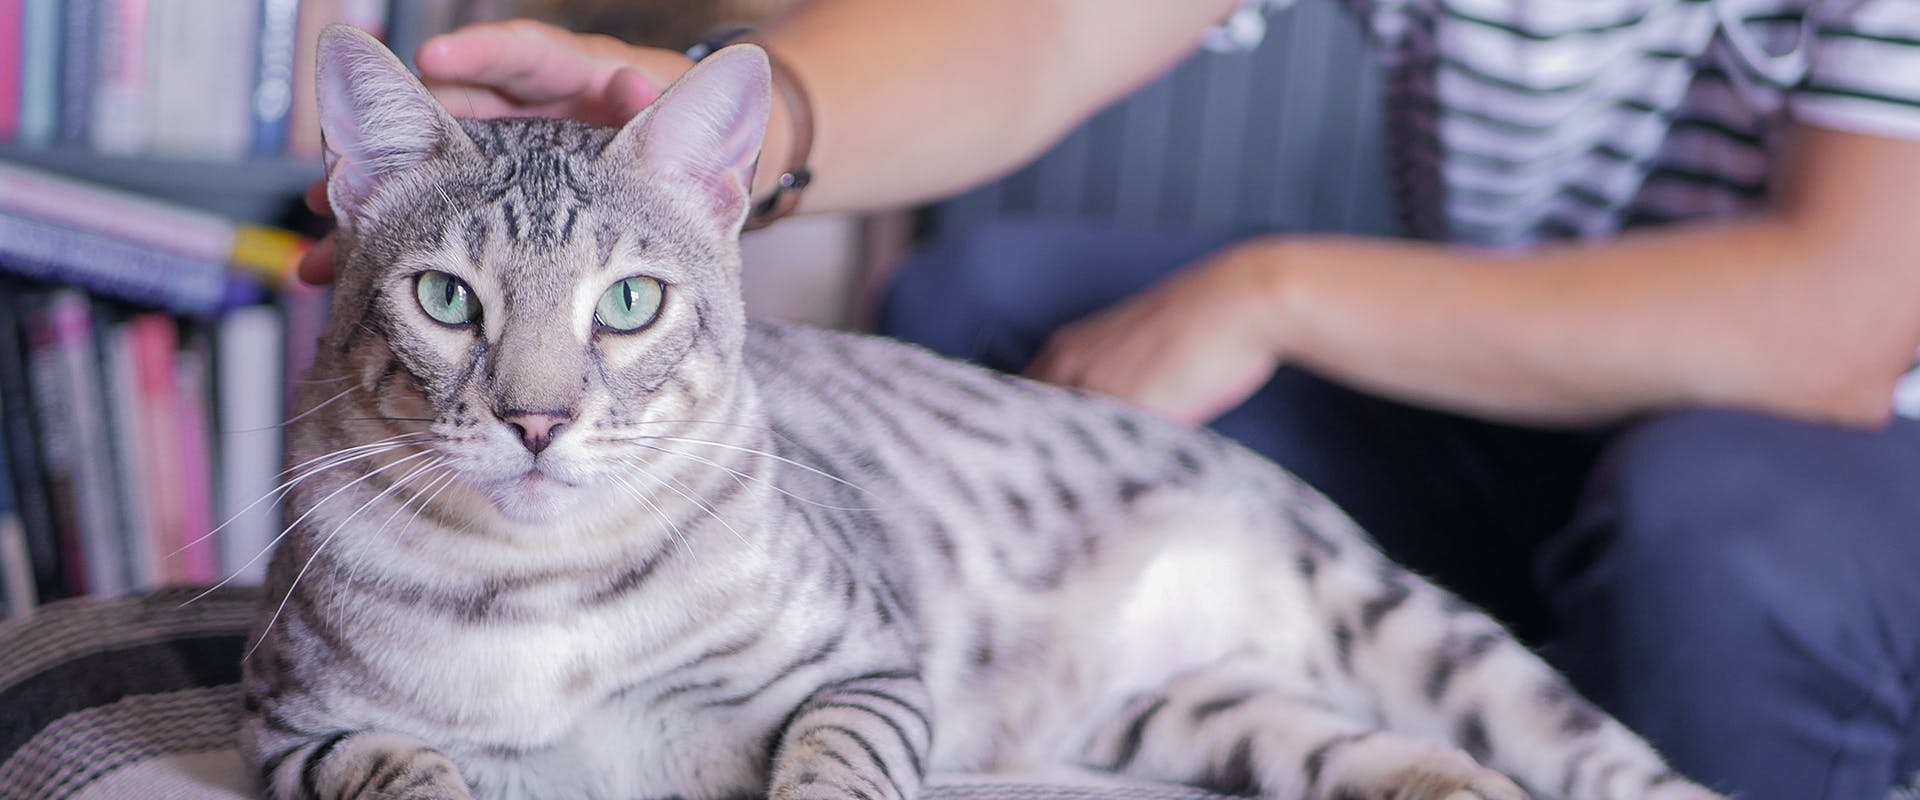 A silver tabby cat, a person stroking it in the background